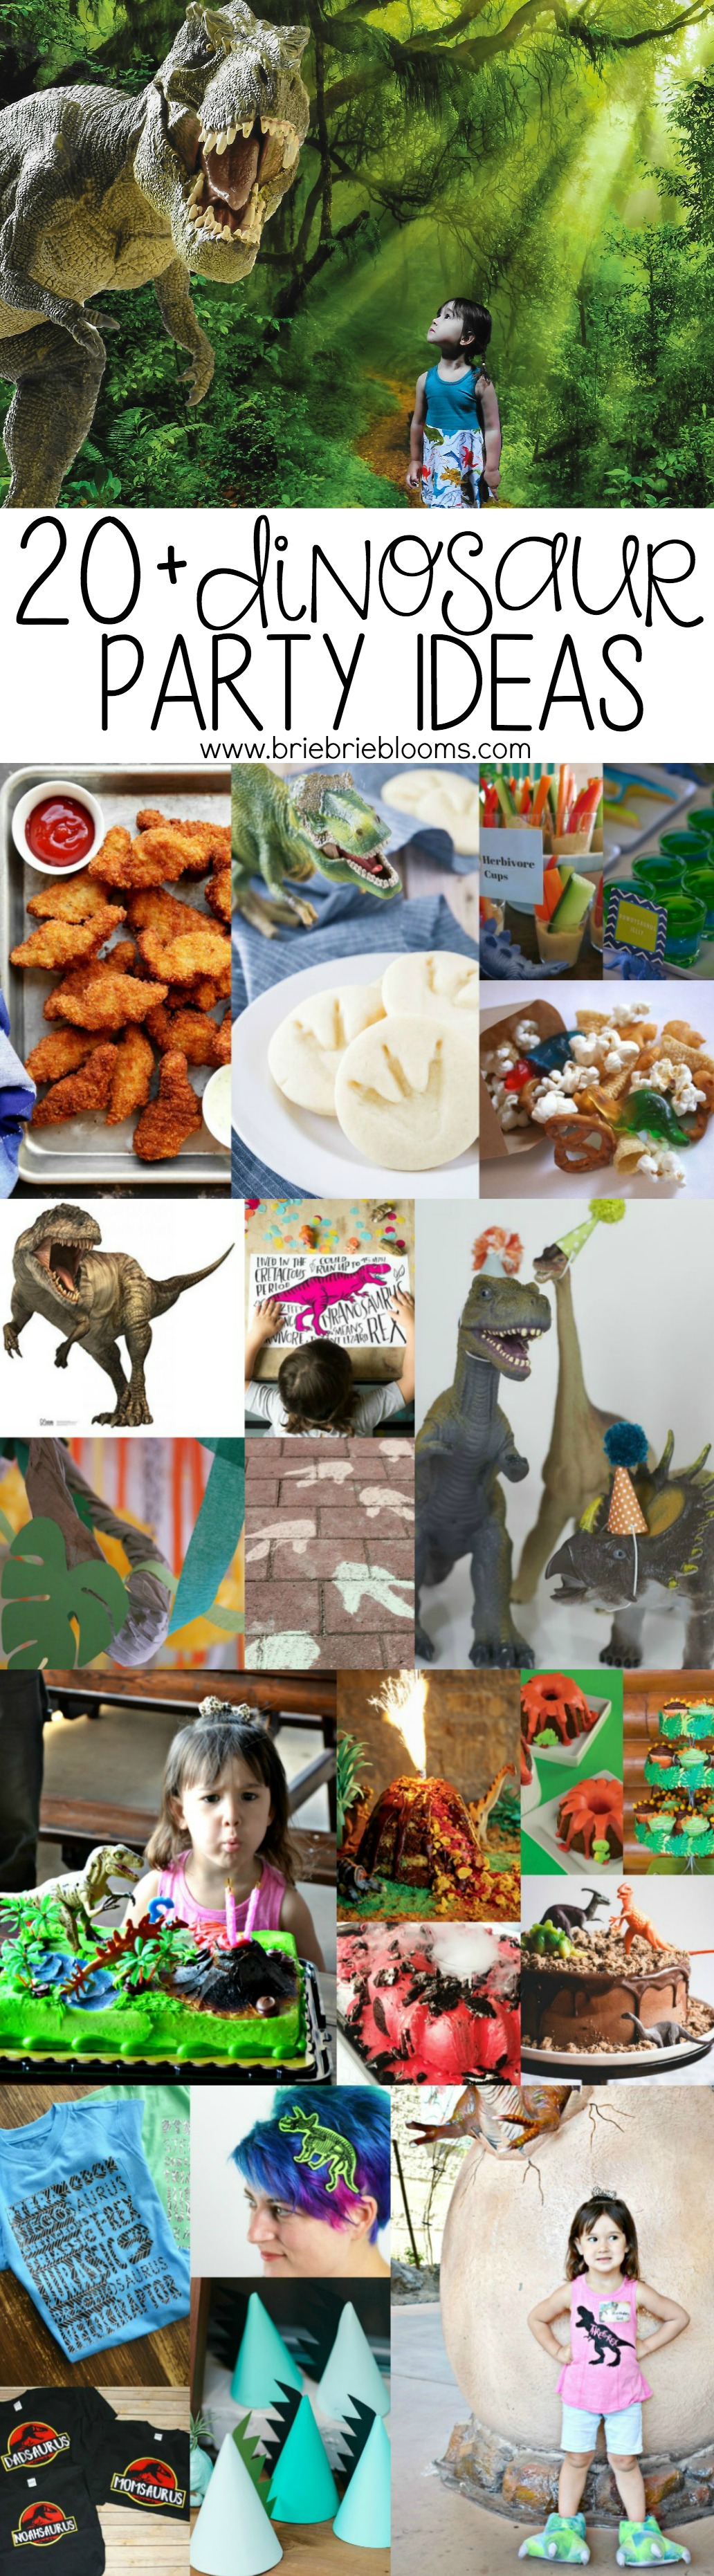 Plan the ultimate dinosaur party with these 20+ dinosaur party ideas!